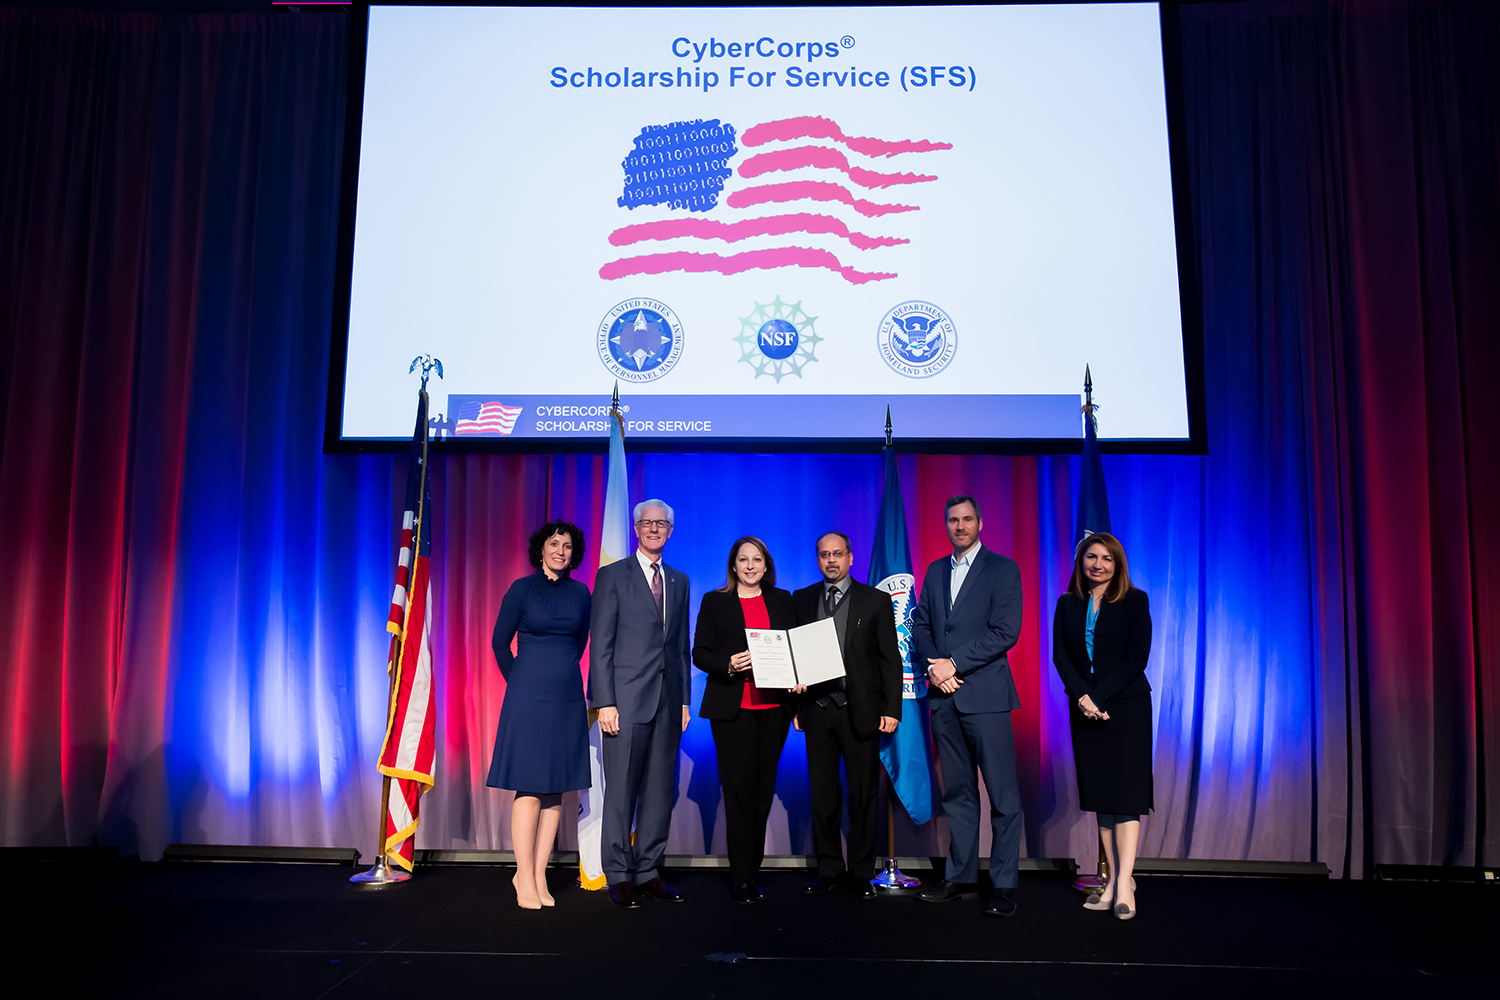 Dr. Eman El-Sheikh and Dr. Tirthankar Ghosh recognized at the CyberCorps Scholarship for Service Awards Ceremony in Washington, D.C.